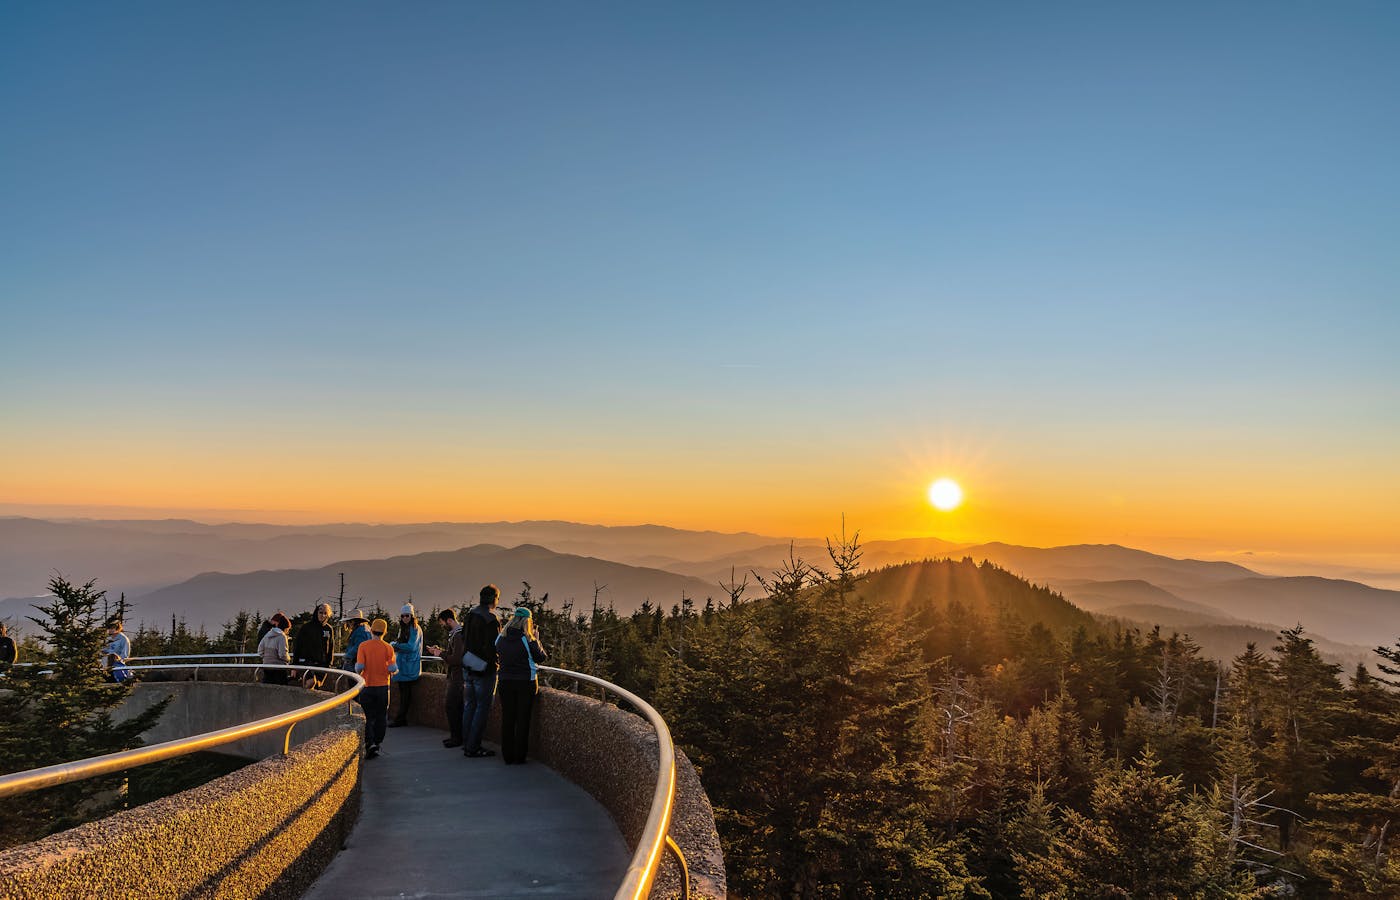 Clingmans Dome at Great Smoky Mountains National Park